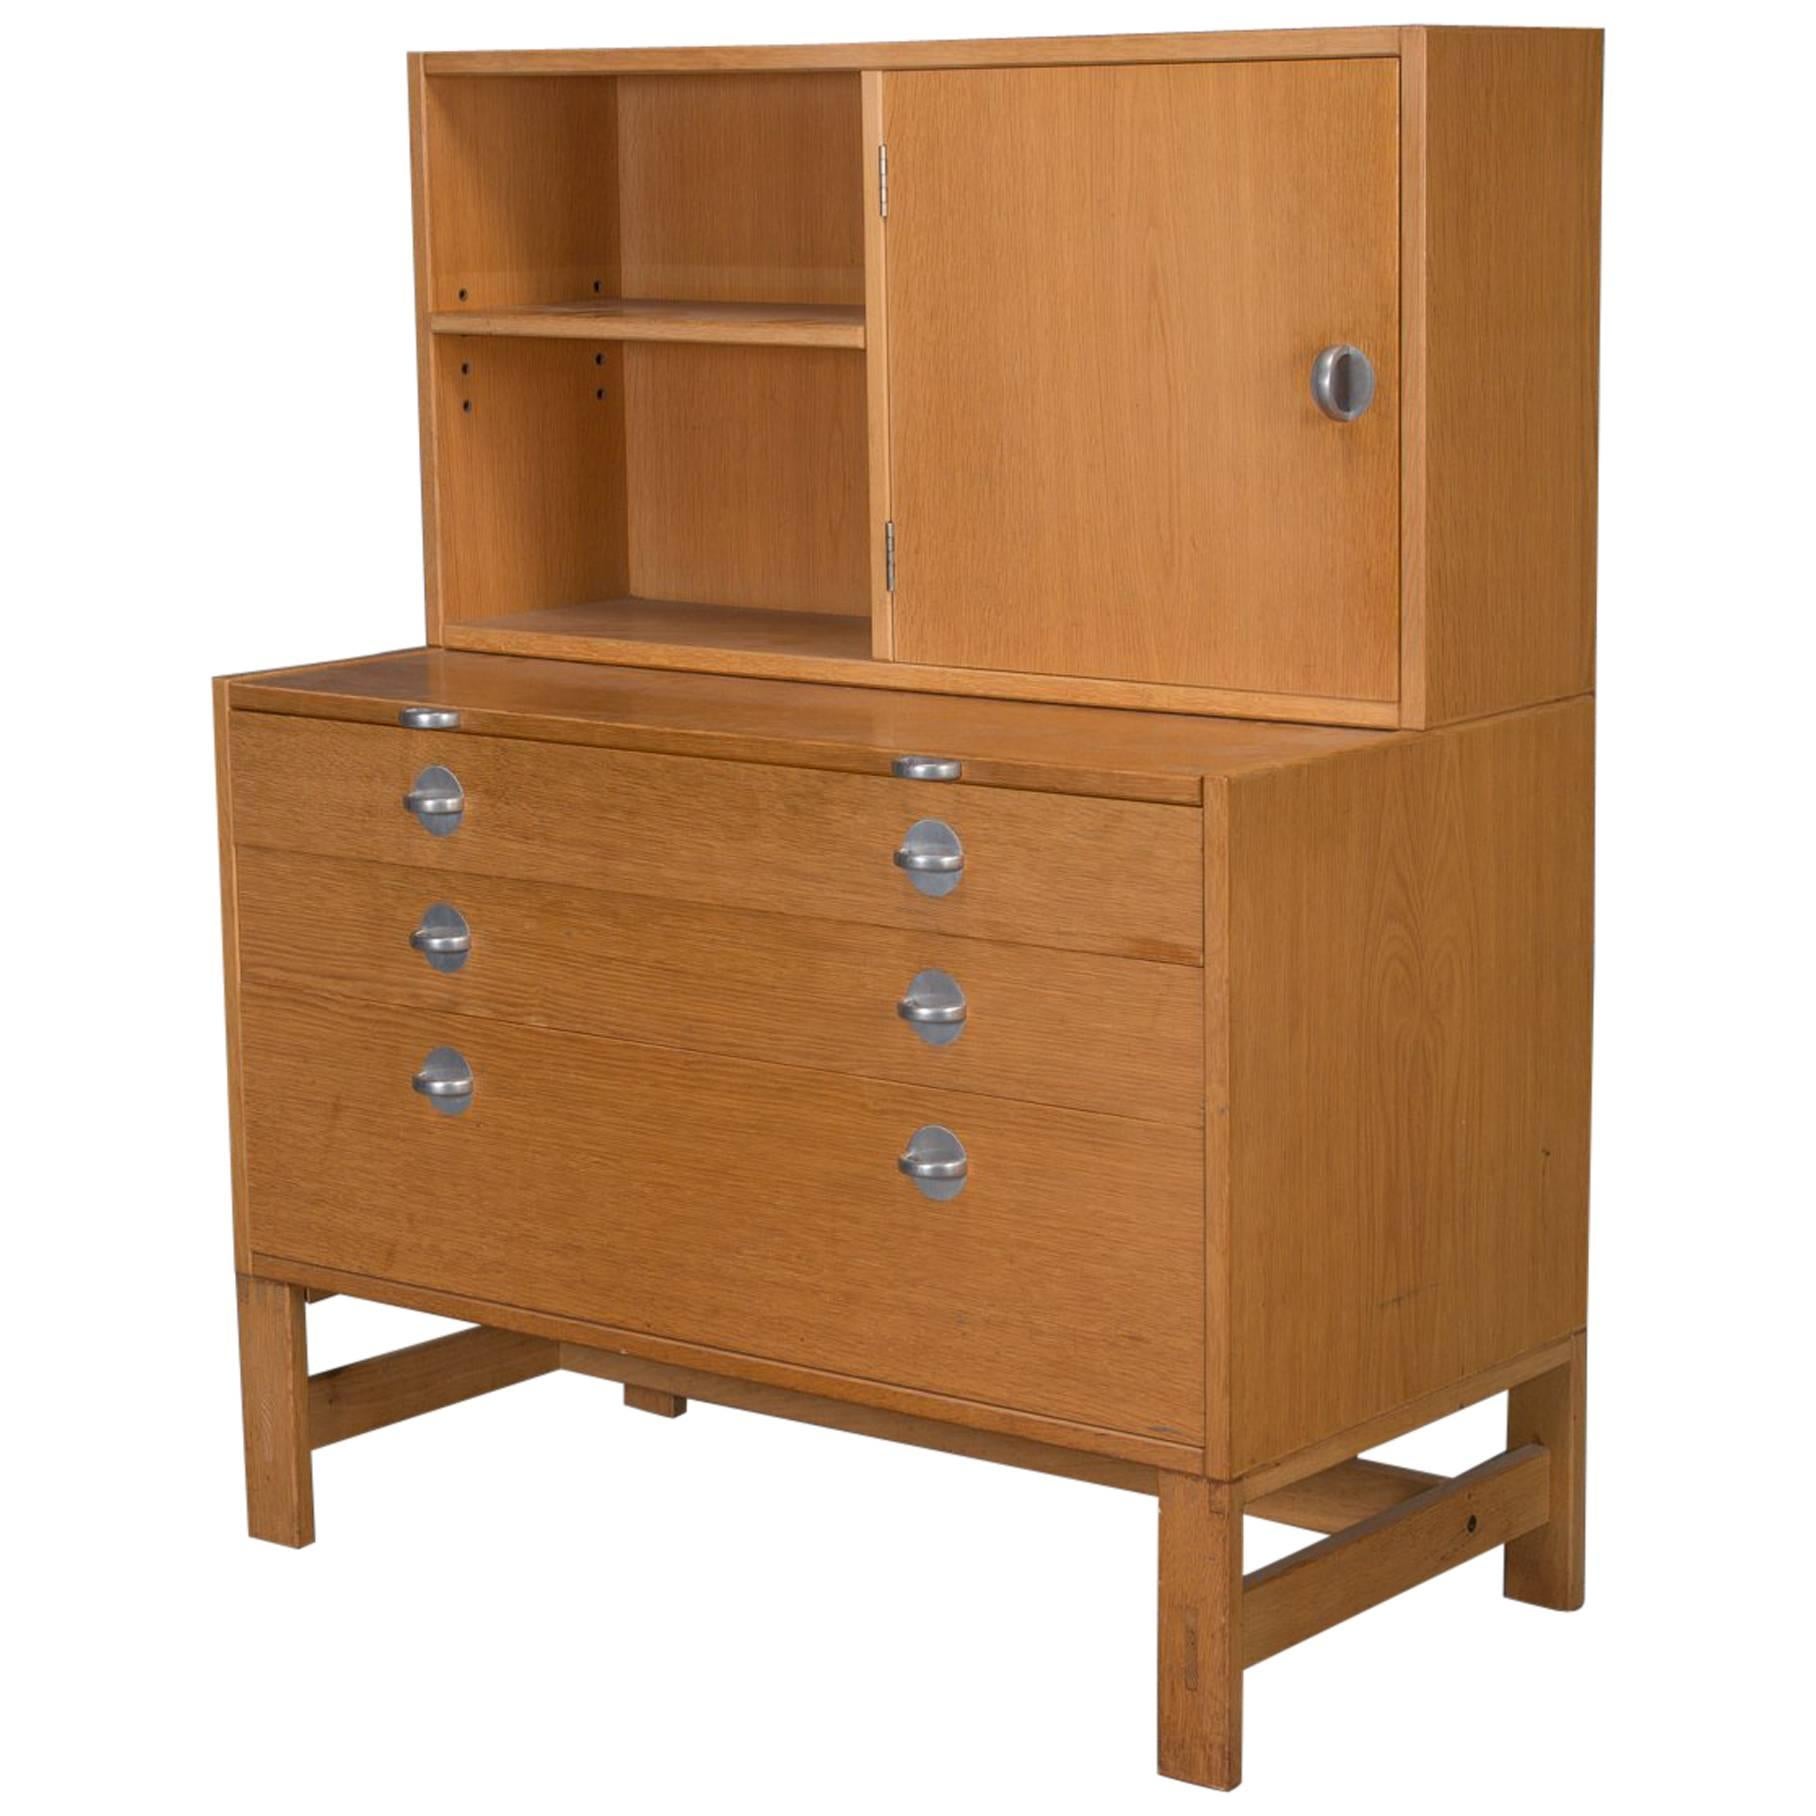 Oak Bookcase Unit and Chest with Stainless Steel Handles